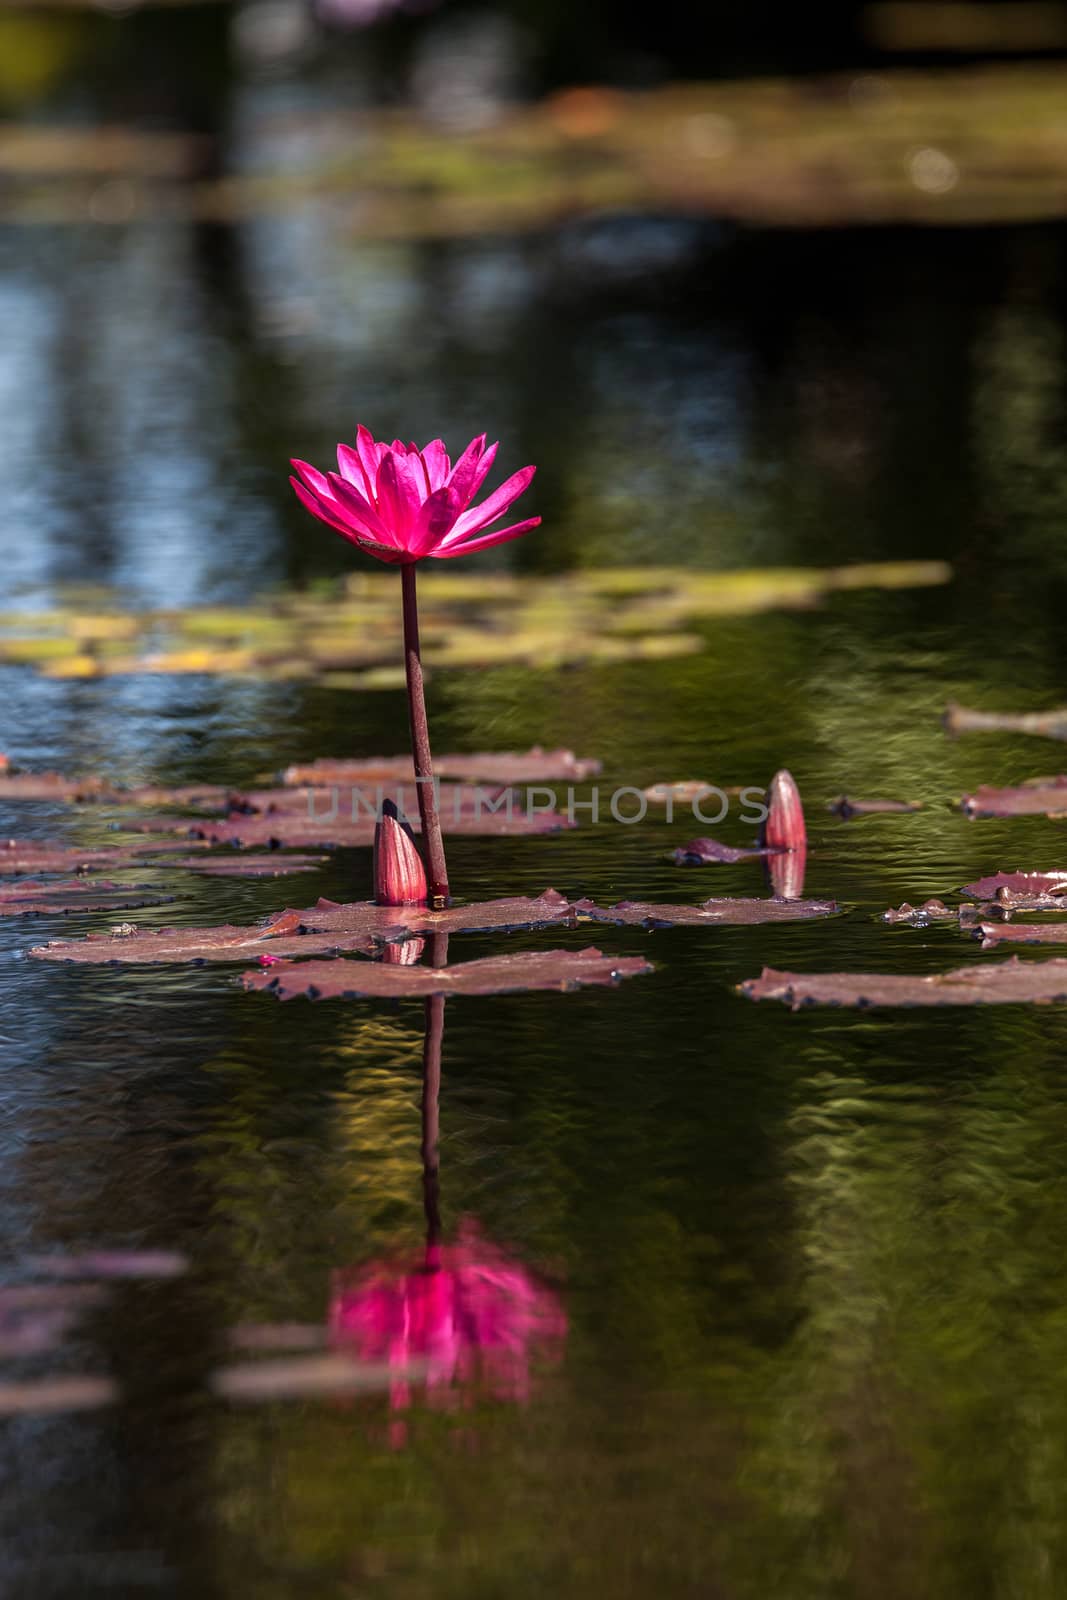 Pink red Water lily Nymphaeaceae blossoms among lily pads on a pond in Naples, Florida